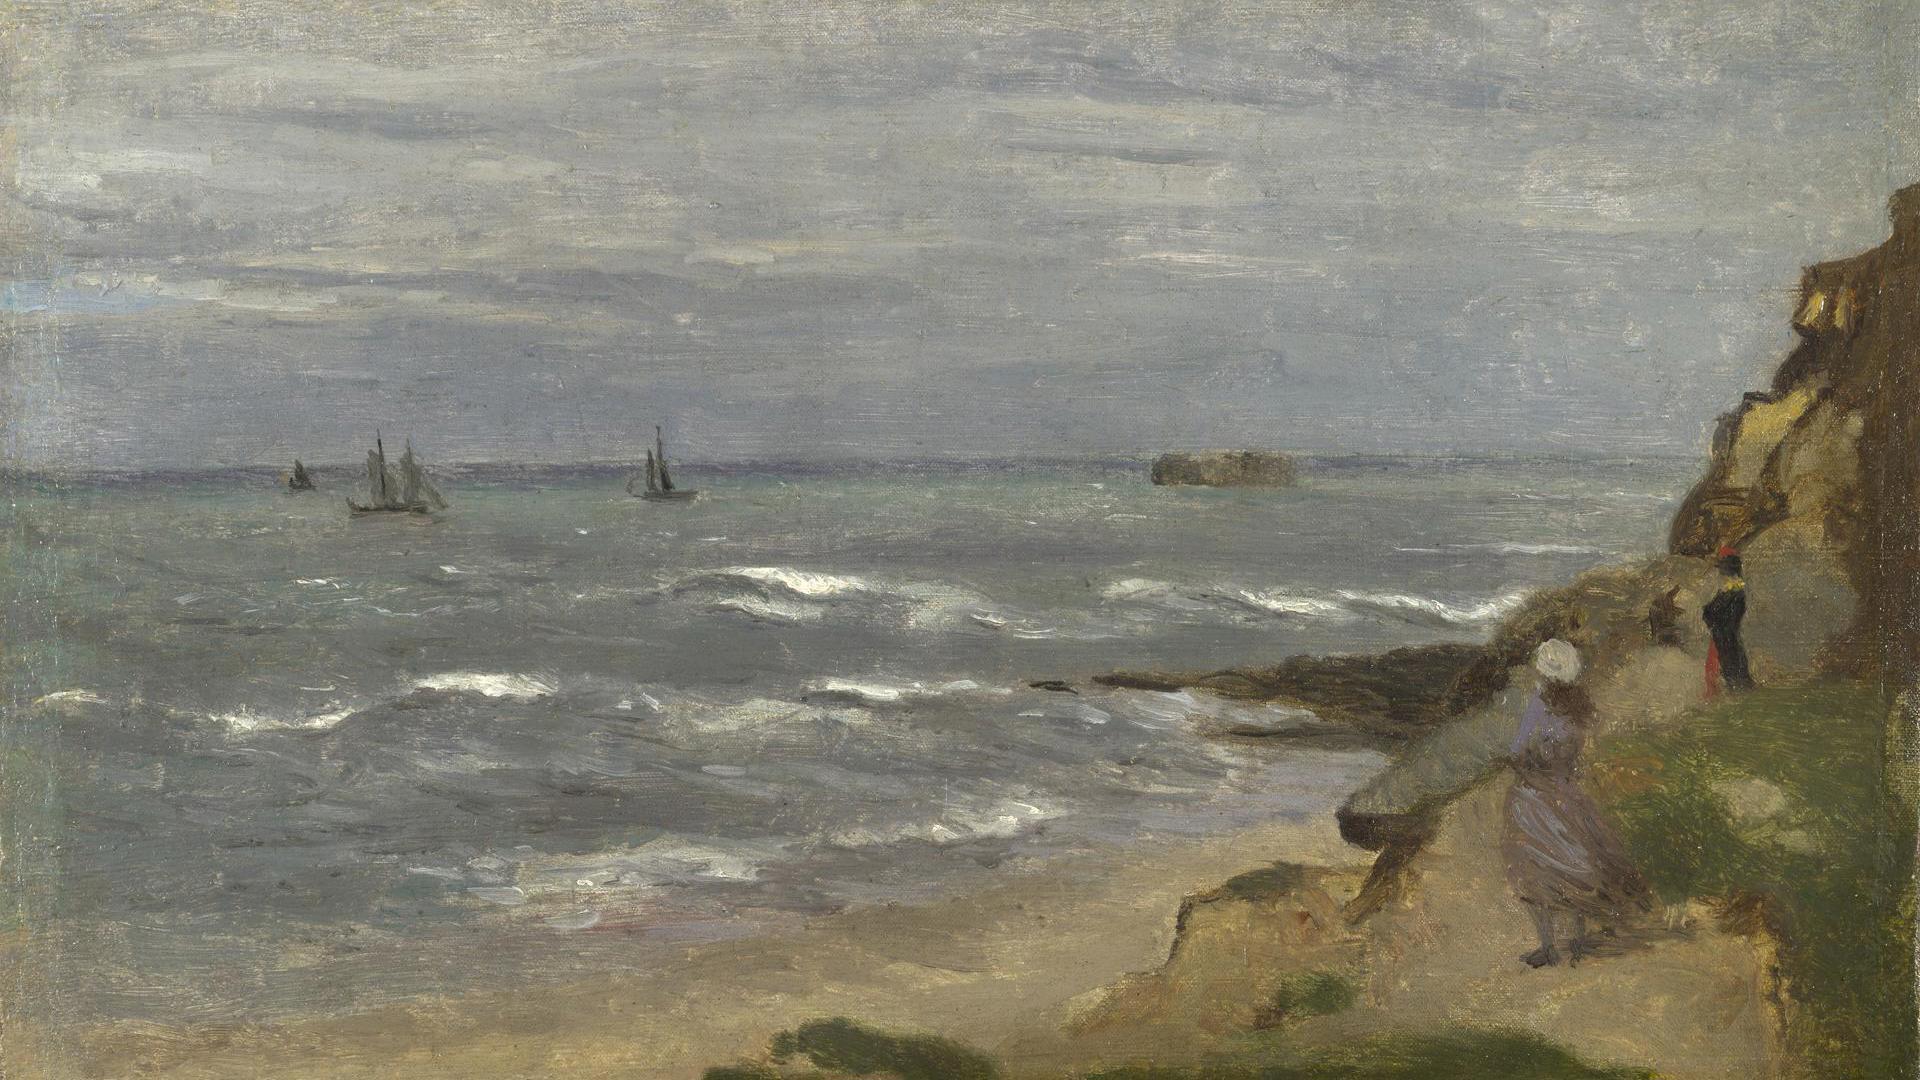 Seascape with Figures on Cliffs by Follower of Jean-Baptiste-Camille Corot